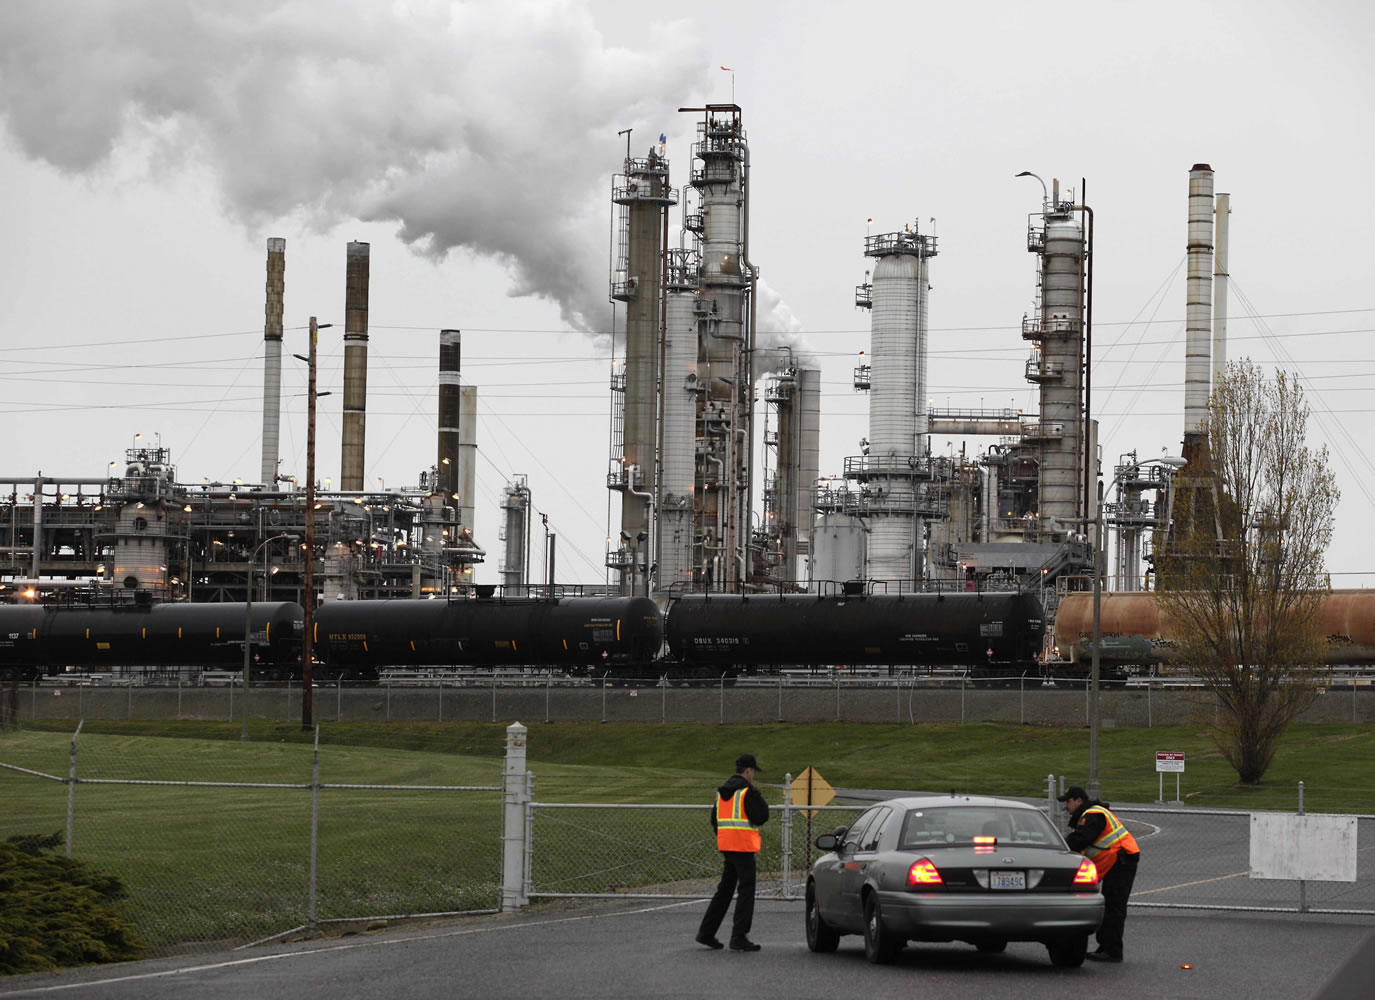 The Tesoro Corp. refinery in Anacortes the morning after an explosion April 2, 2010 that killed seven people.